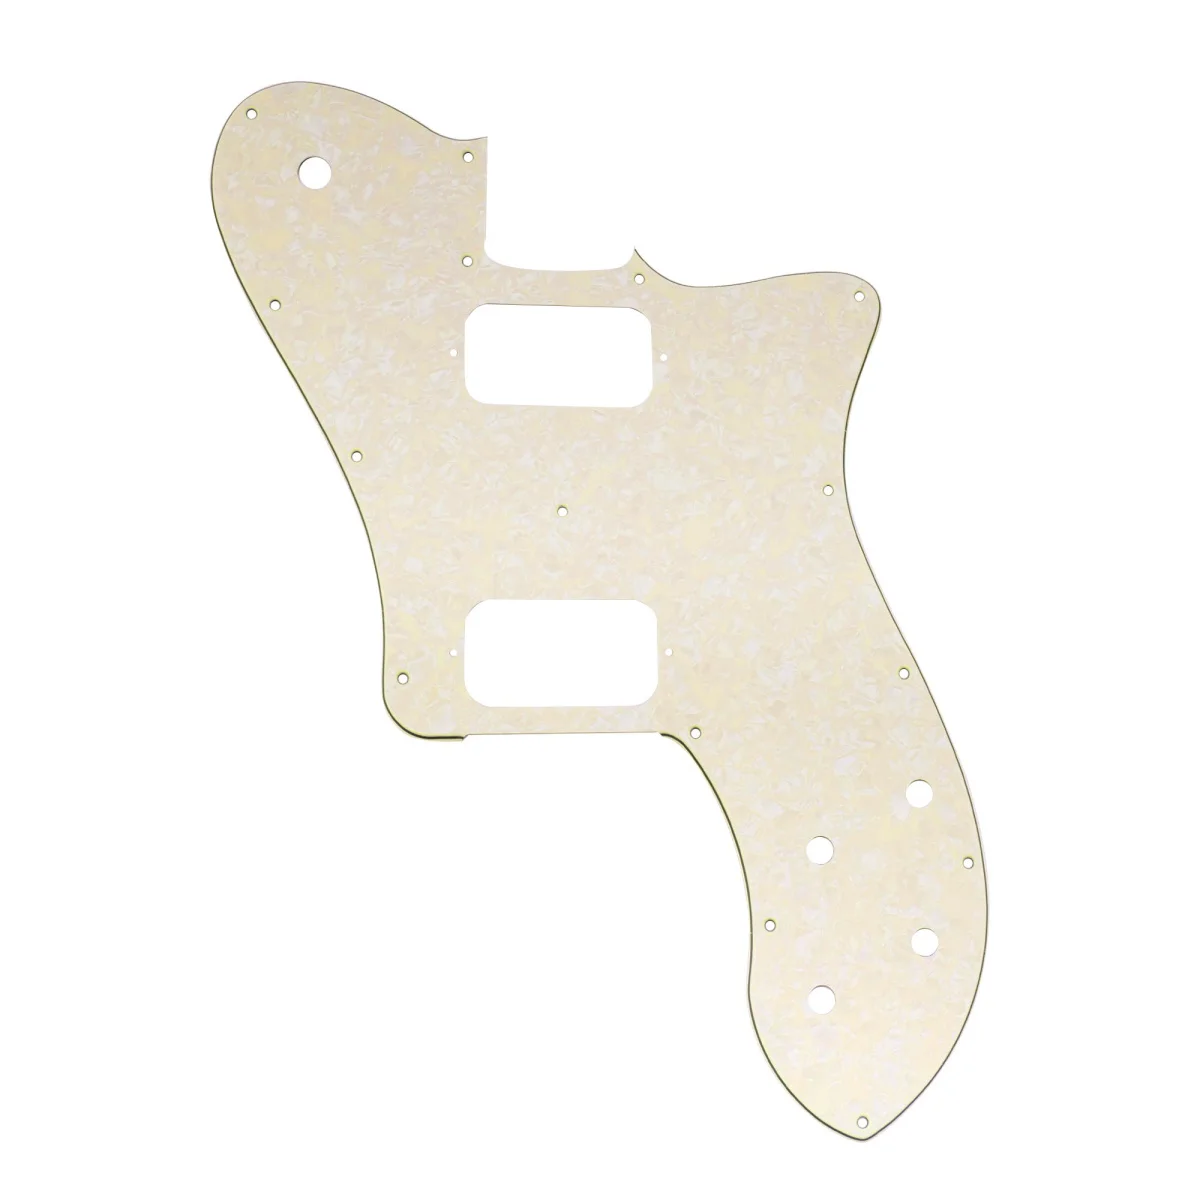 

Musiclily Pro 15 Holes Uncovered HH Pickguard for Mexico Fender 72 Tele Deluxe Style Electric Guitar, 4Ply Aged White Pearl